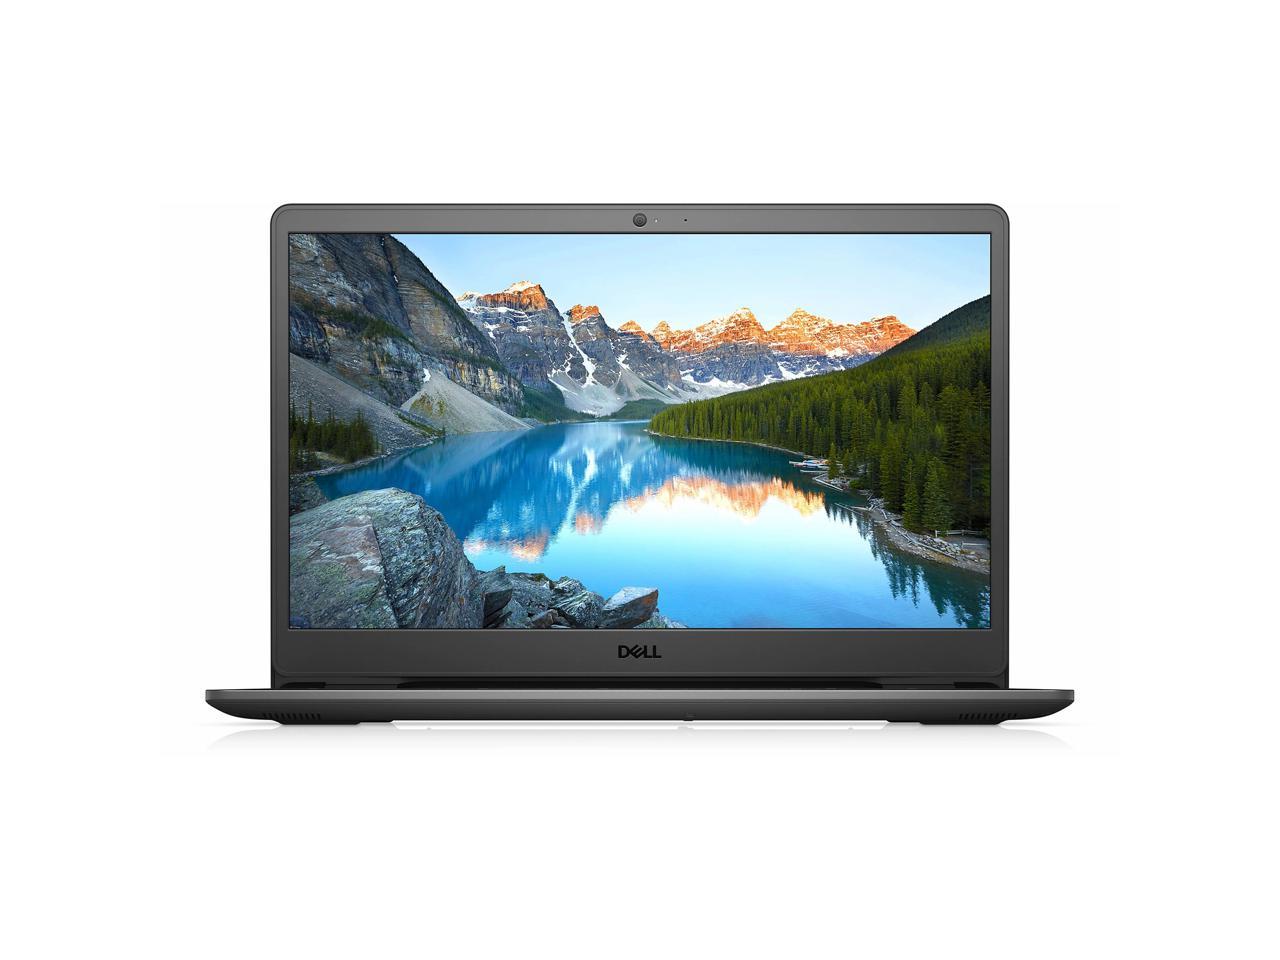 Dell Inspiron 15 3000 3502 Business Laptop 15.6